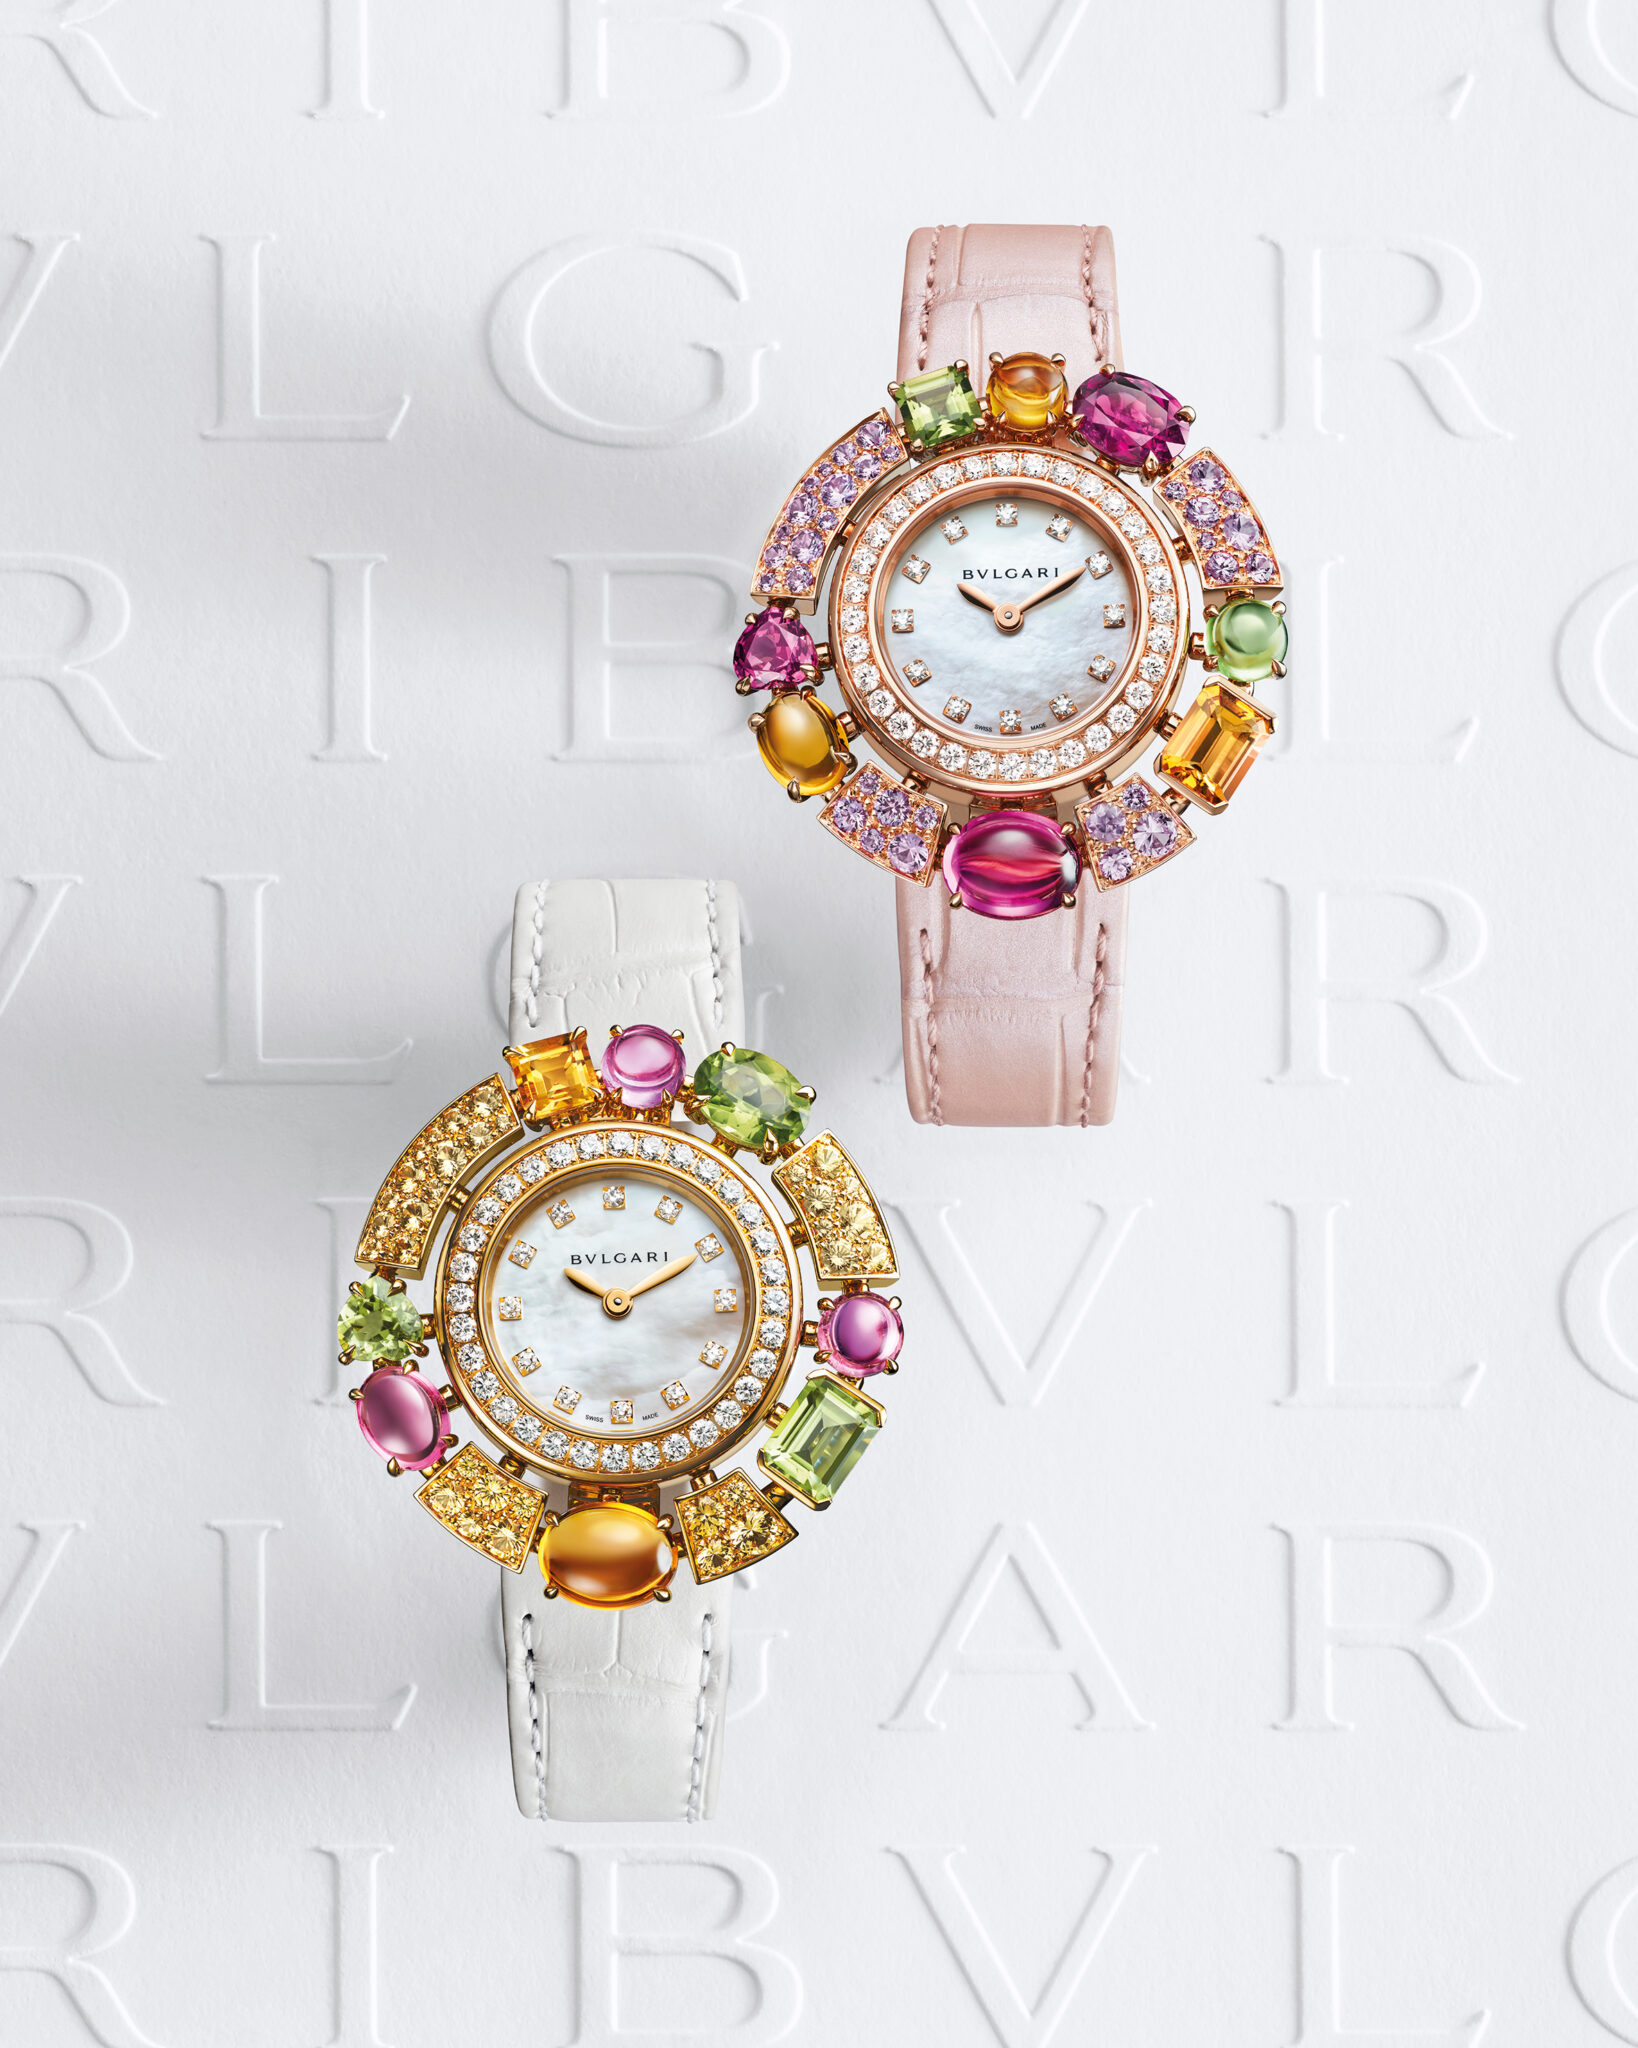 Bulgari Serpenti And Diva, 2 Intensely Italian And Dazzling Watches ...